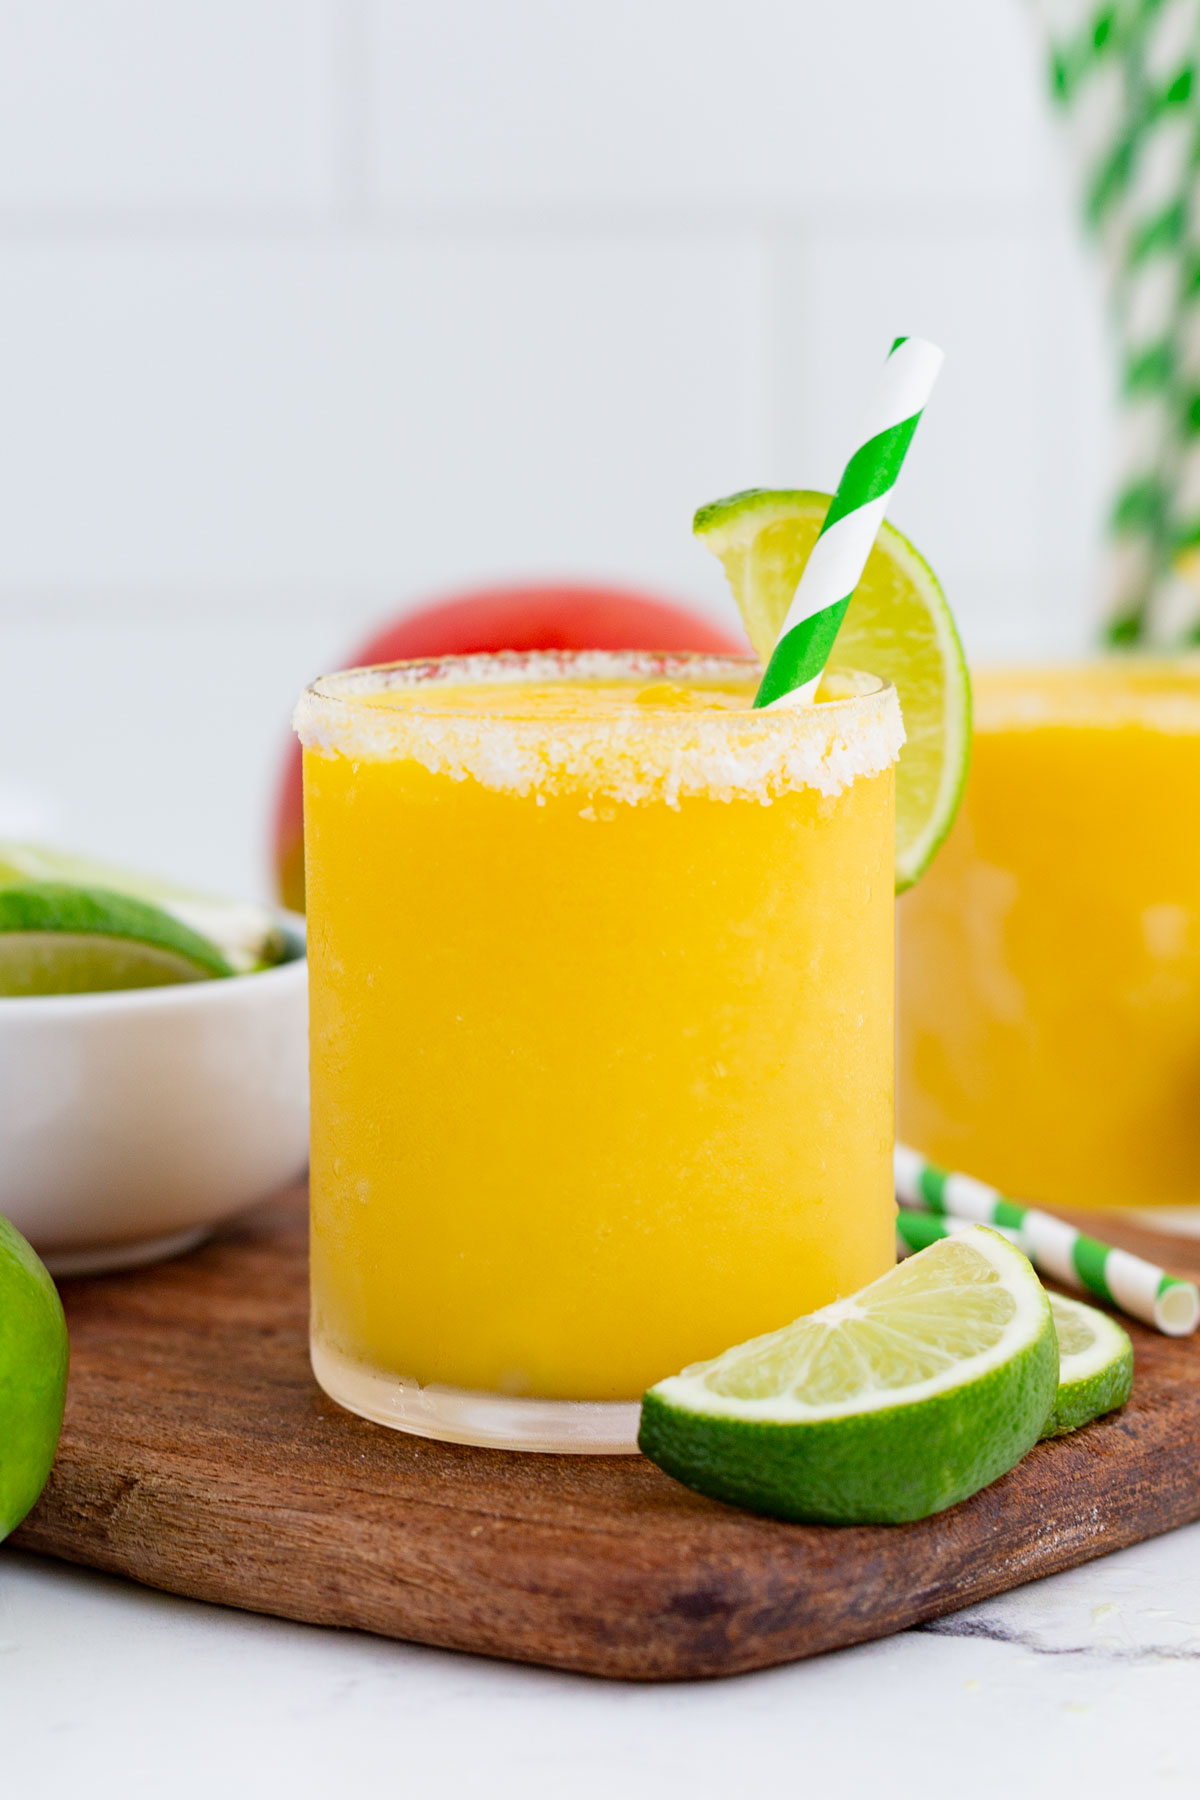 Two glasses of mango margarita are ready to drink.